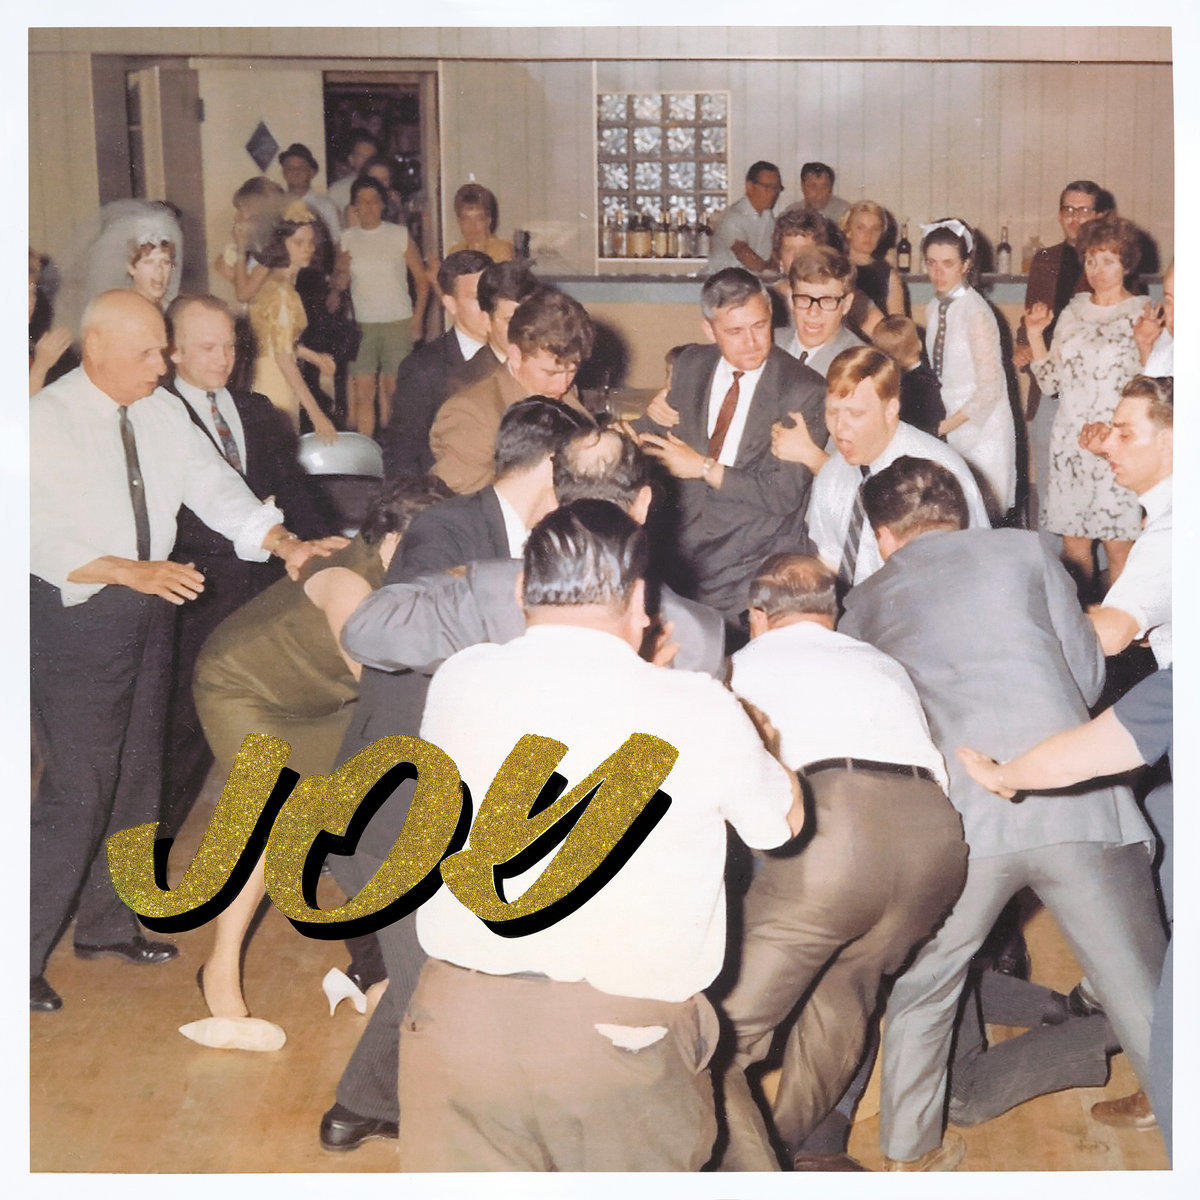 Of (CD) Resistance. - As - Idles Joy Act An